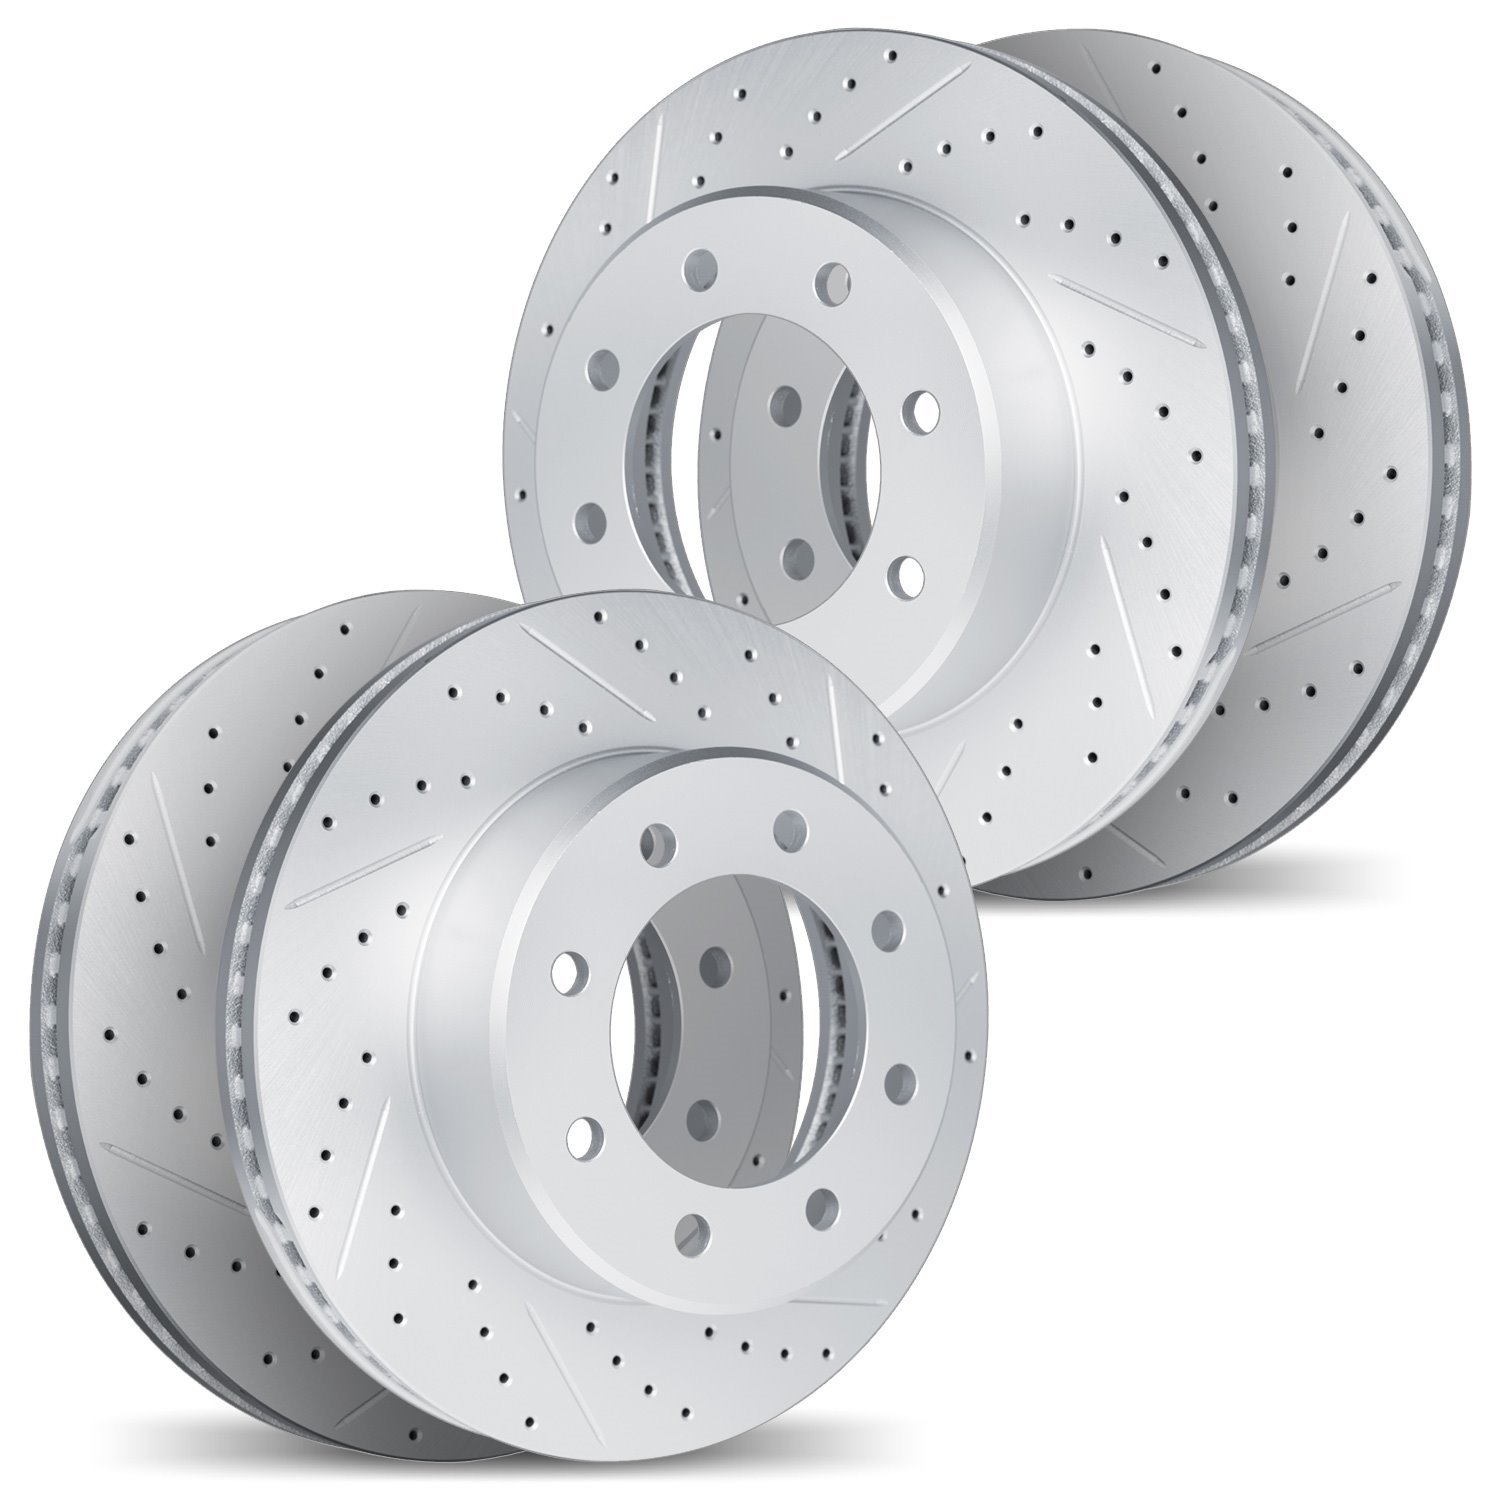 2004-54110 Geoperformance Drilled/Slotted Brake Rotors, 1999-1999 Ford/Lincoln/Mercury/Mazda, Position: Front and Rear